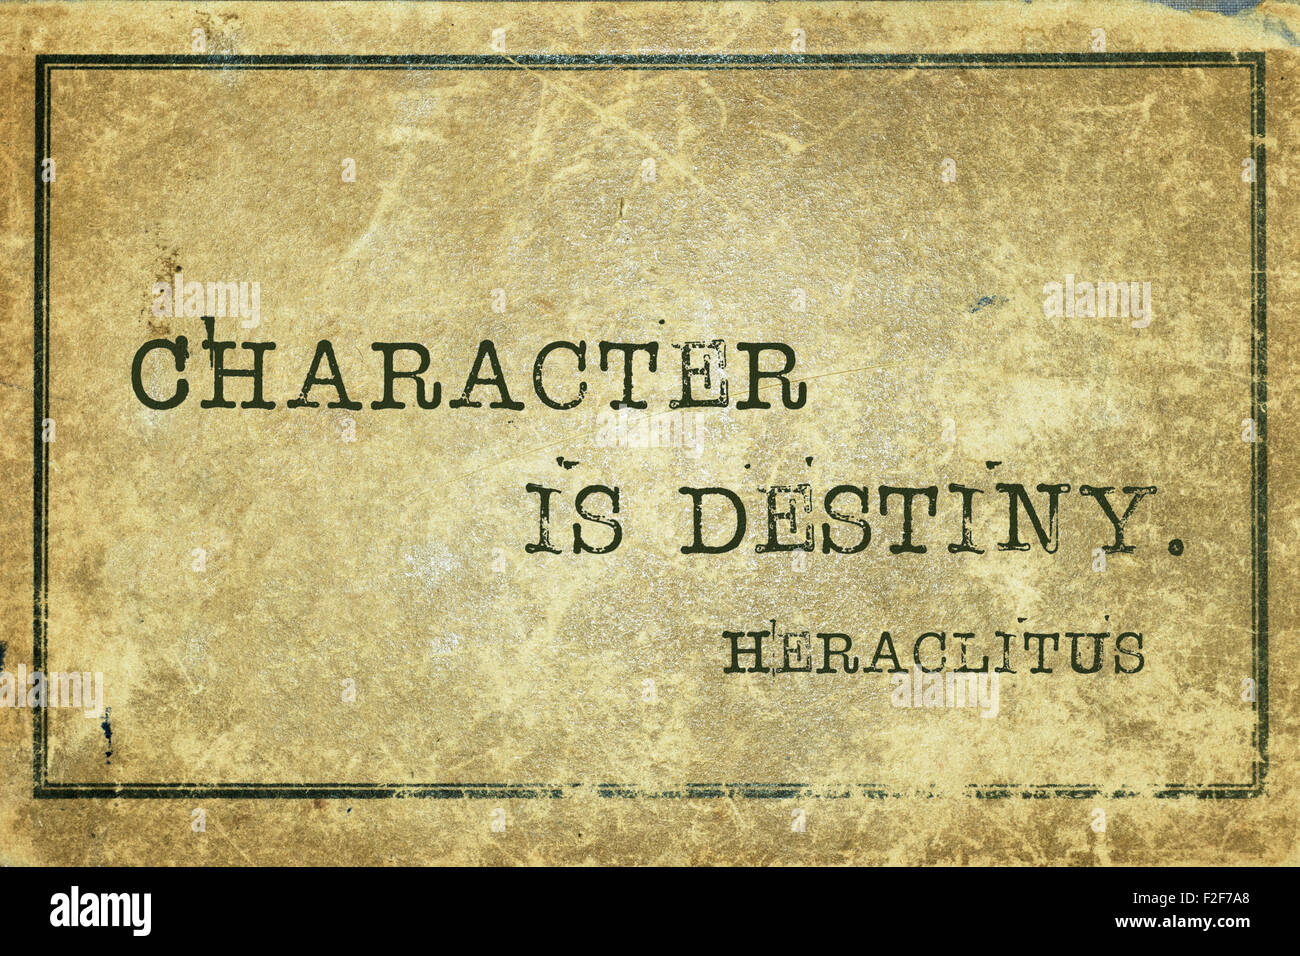 Character is destiny - ancient Greek philosopher Heraclitus quote printed on grunge vintage cardboard Stock Photo